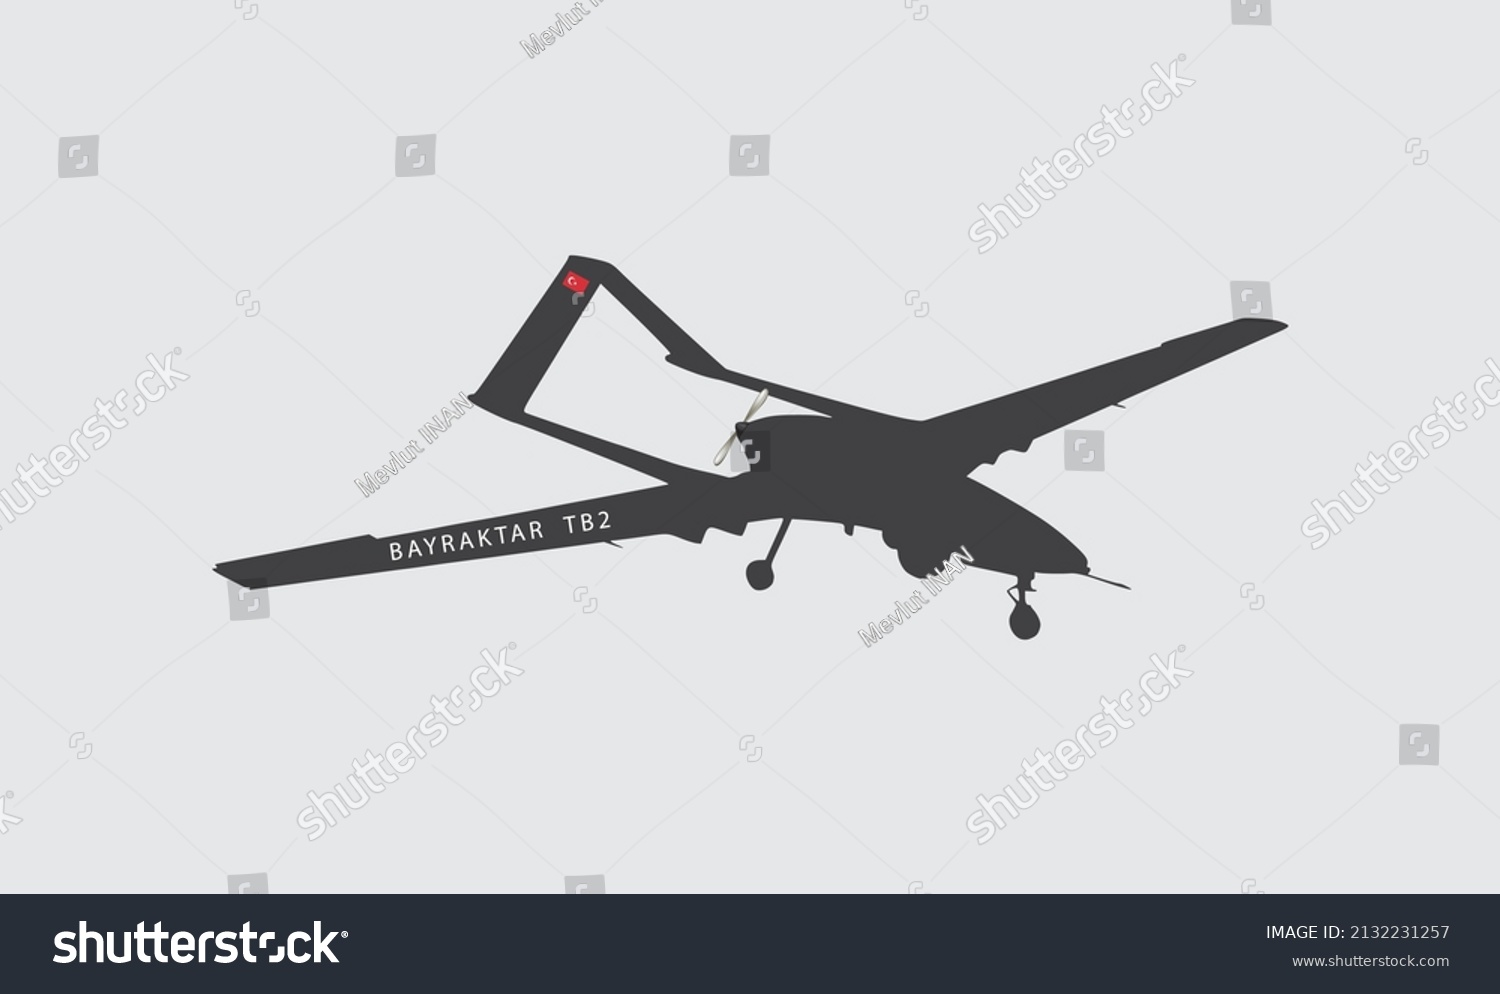 SVG of Unmanned aerial vehicle Bayraktar TB2 SIHA silhouette vector on a white background.Vector drawing of unmanned combat aerial vehicle. Side view. Image for illustration and infographics. svg